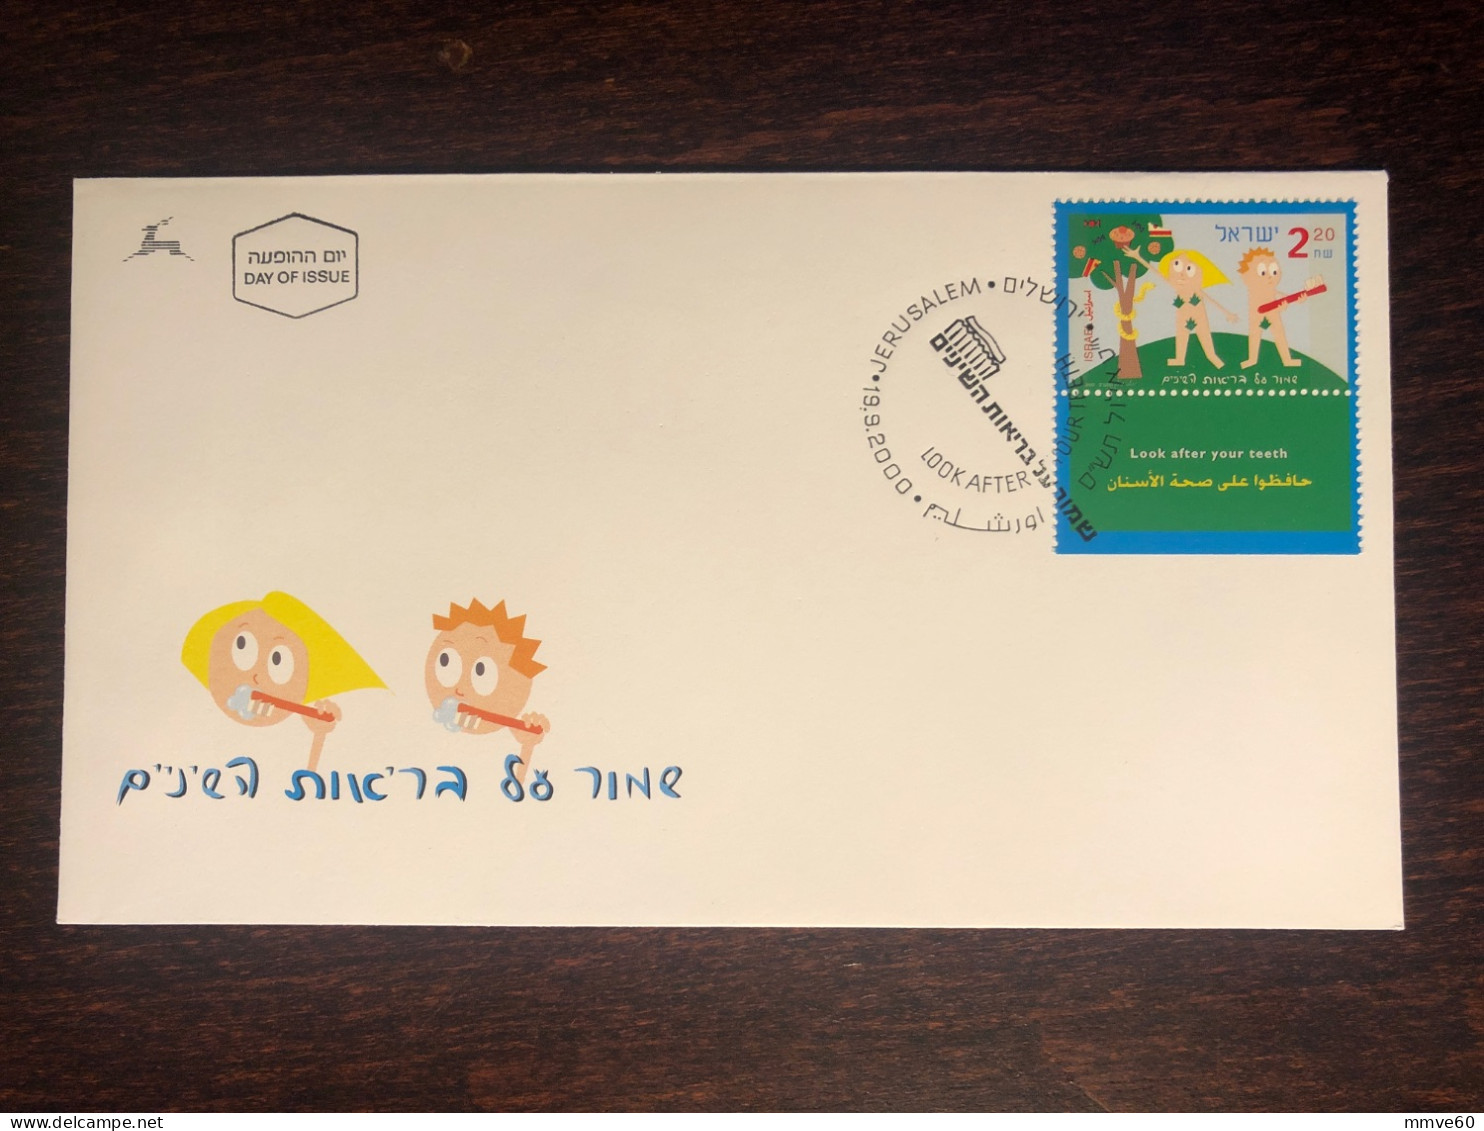 ISRAEL FDC COVER 2000 YEAR DENTAL DENTISTRY HEALTH MEDICINE STAMPS - FDC